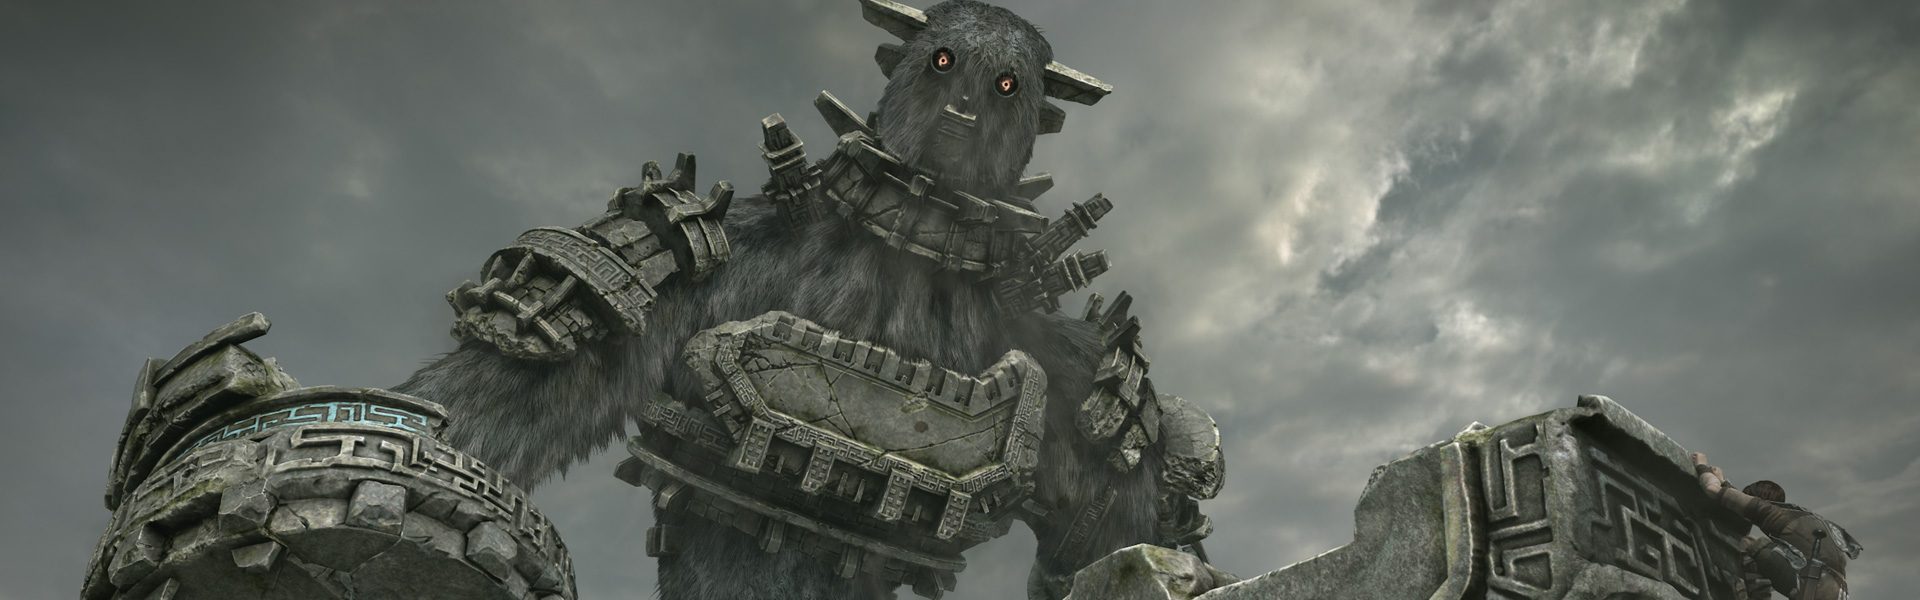 shadow of the colossus 2020